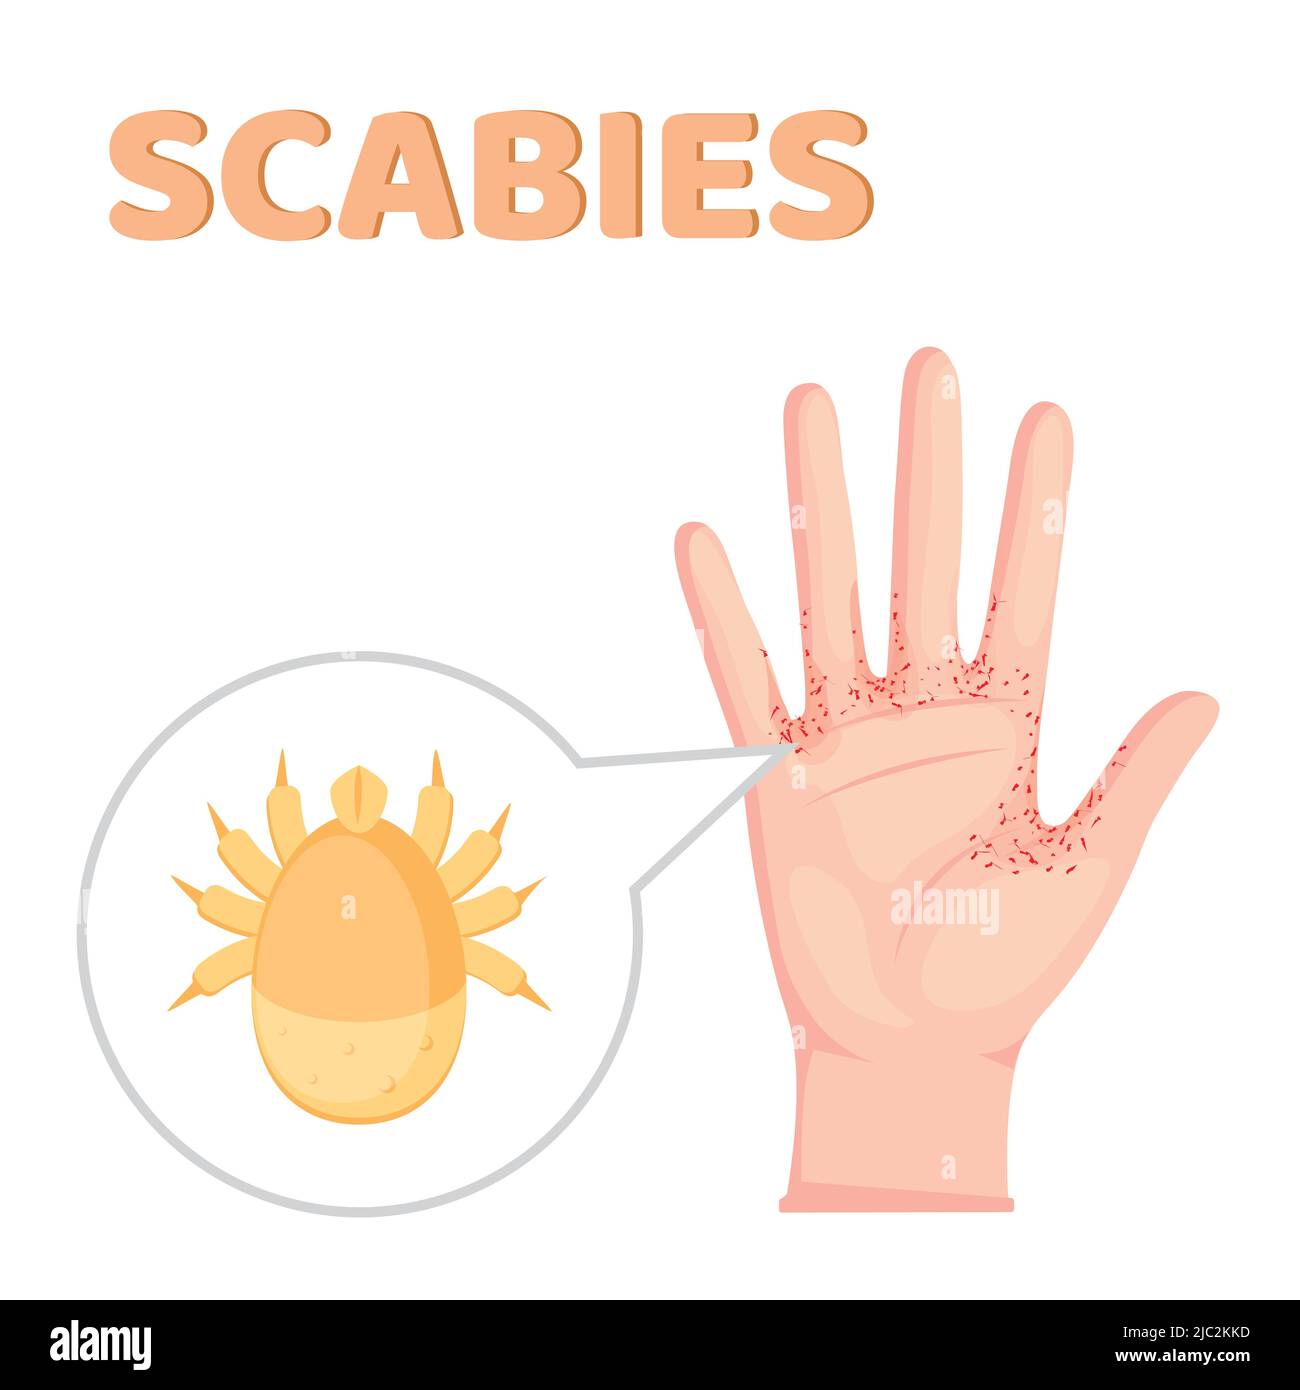 Sarcoptes scabiei. scabies. Sexually transmitted disease. Infographics. illustration on isolated background. Stock Vector